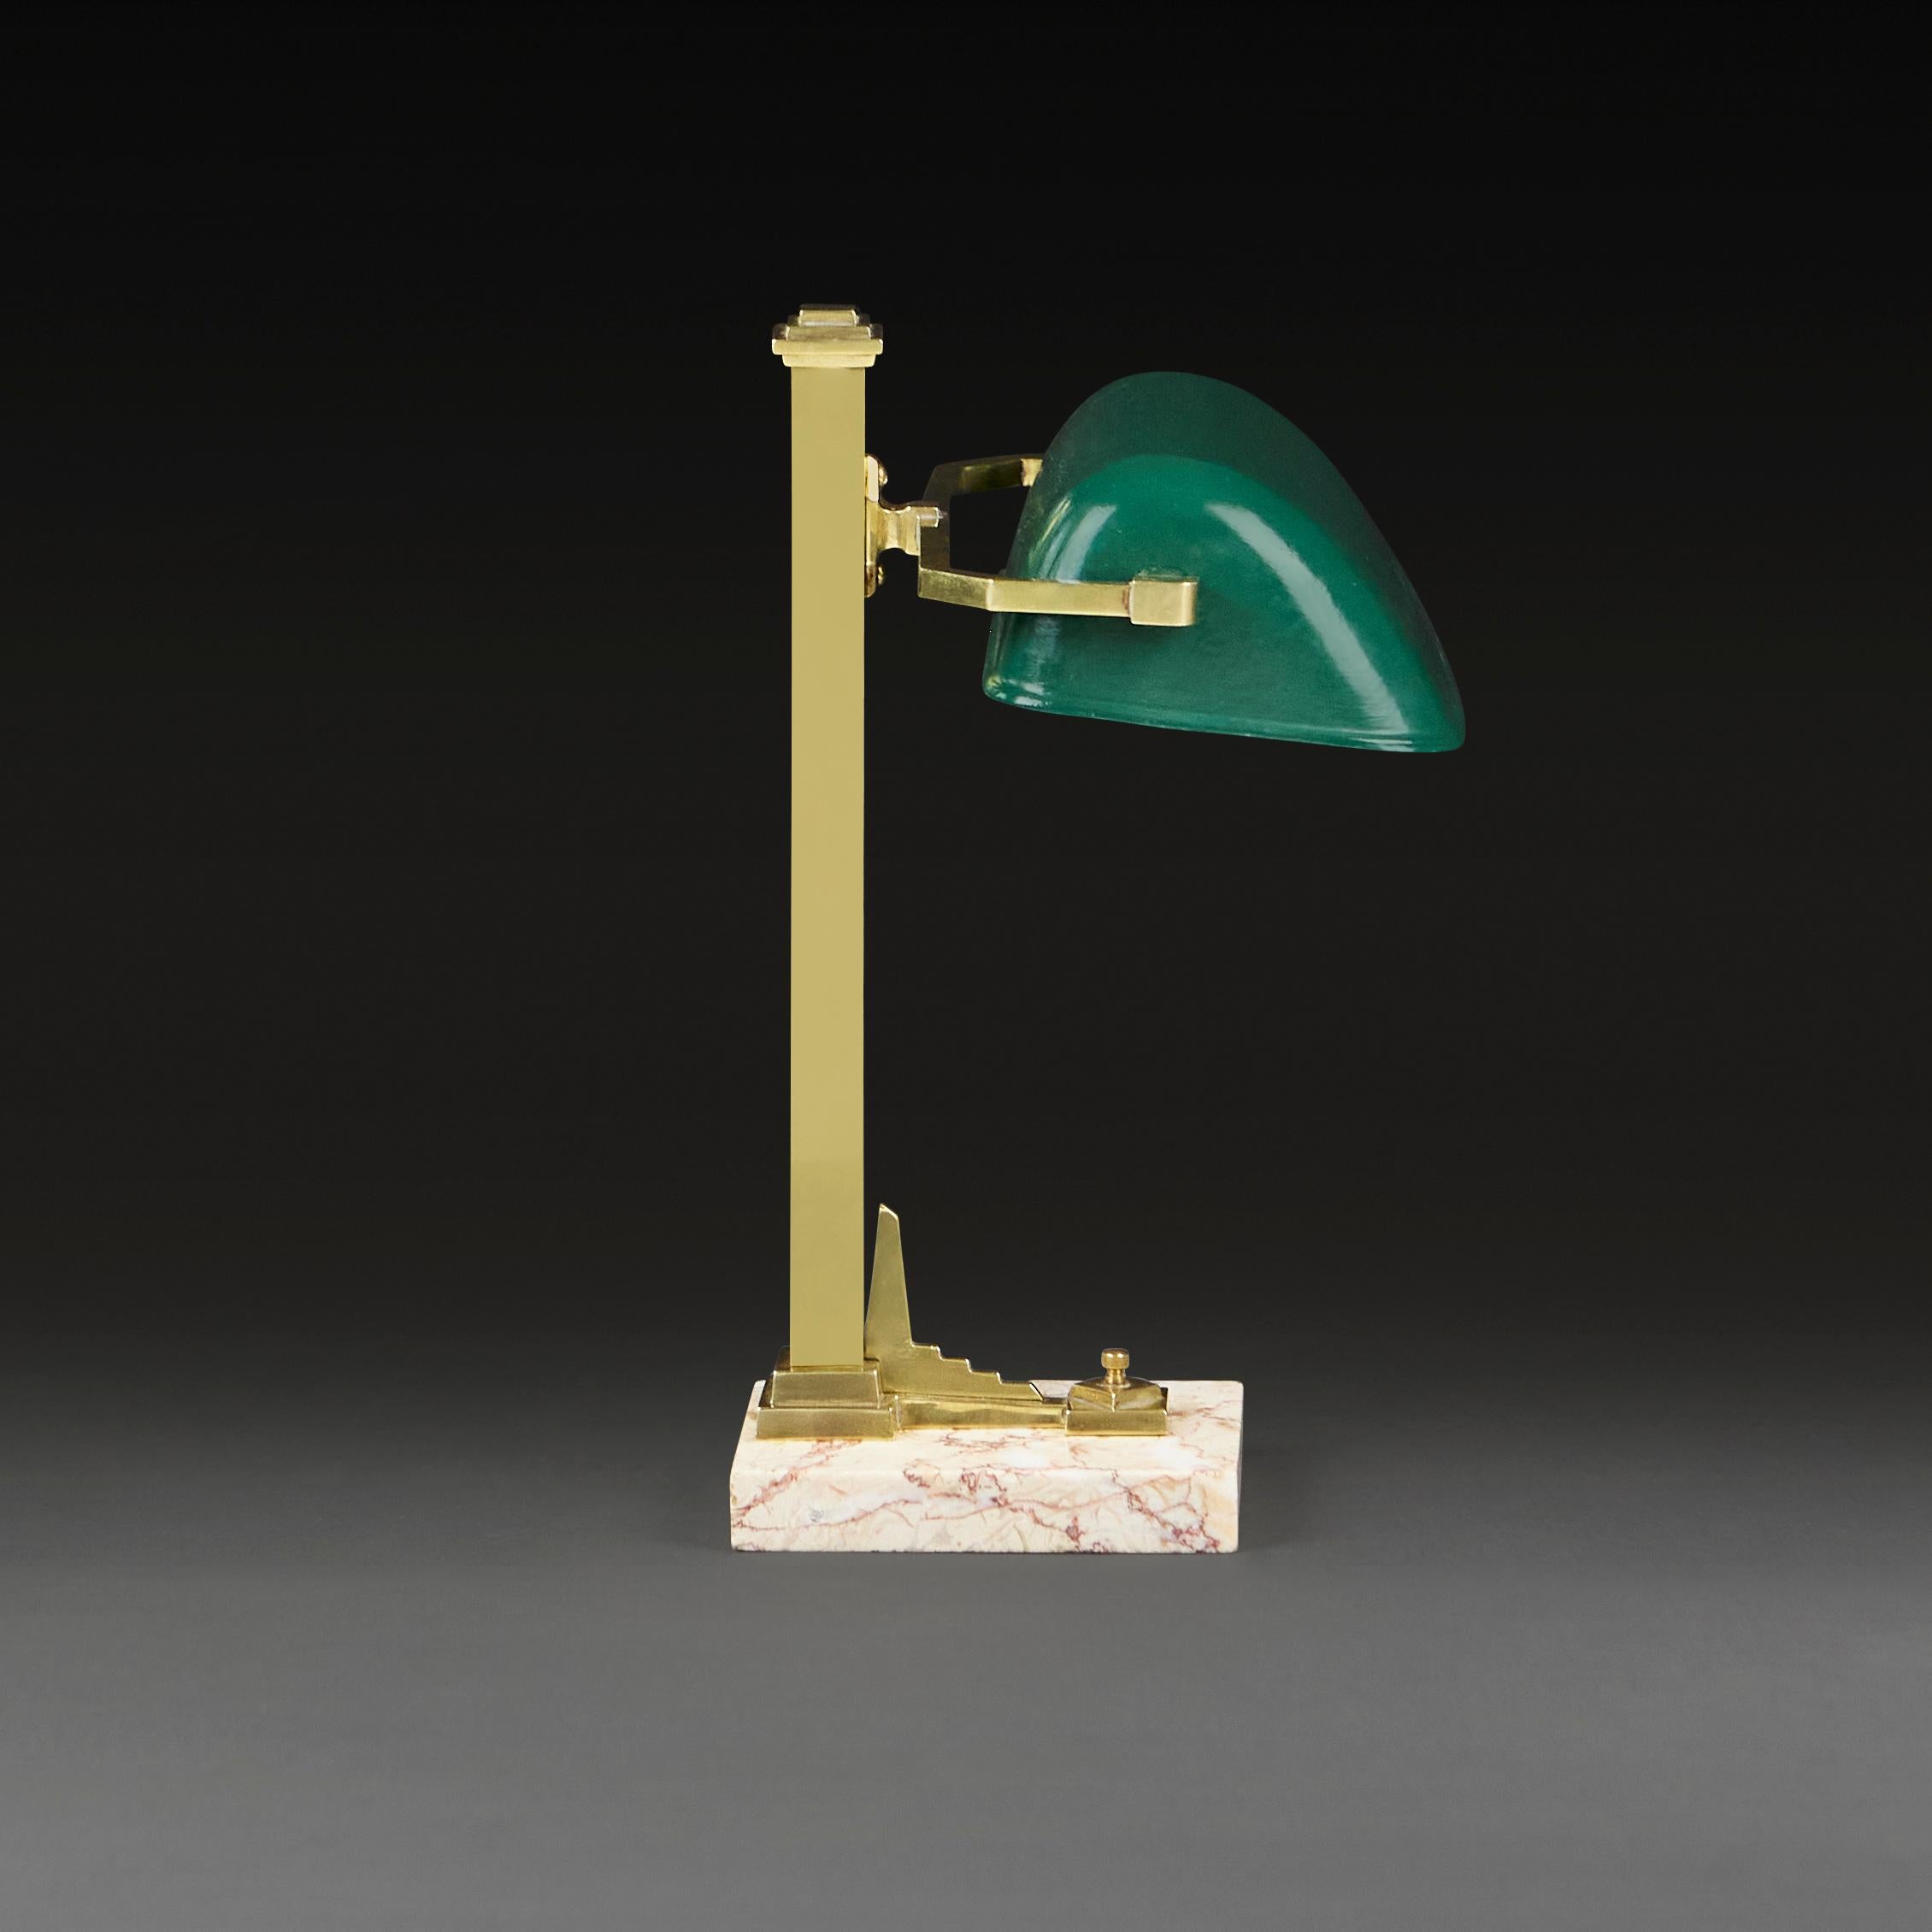 20th Century A 1930s French Art Deco Desk Lamp in Brass, Marble and Green Enamel For Sale